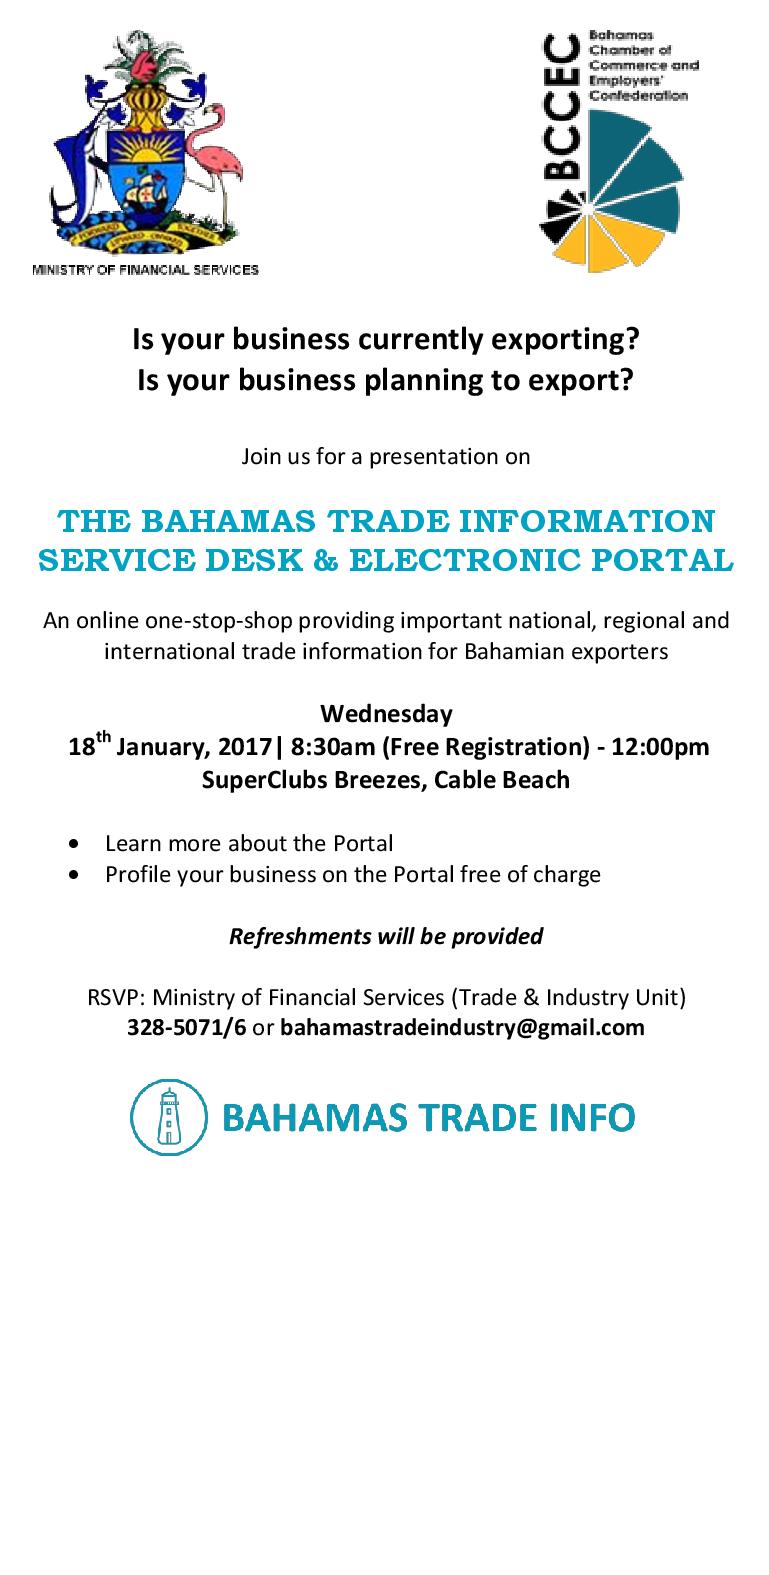 Financial Services and Chamber of Commerce introduce Exporters to Trade Portal